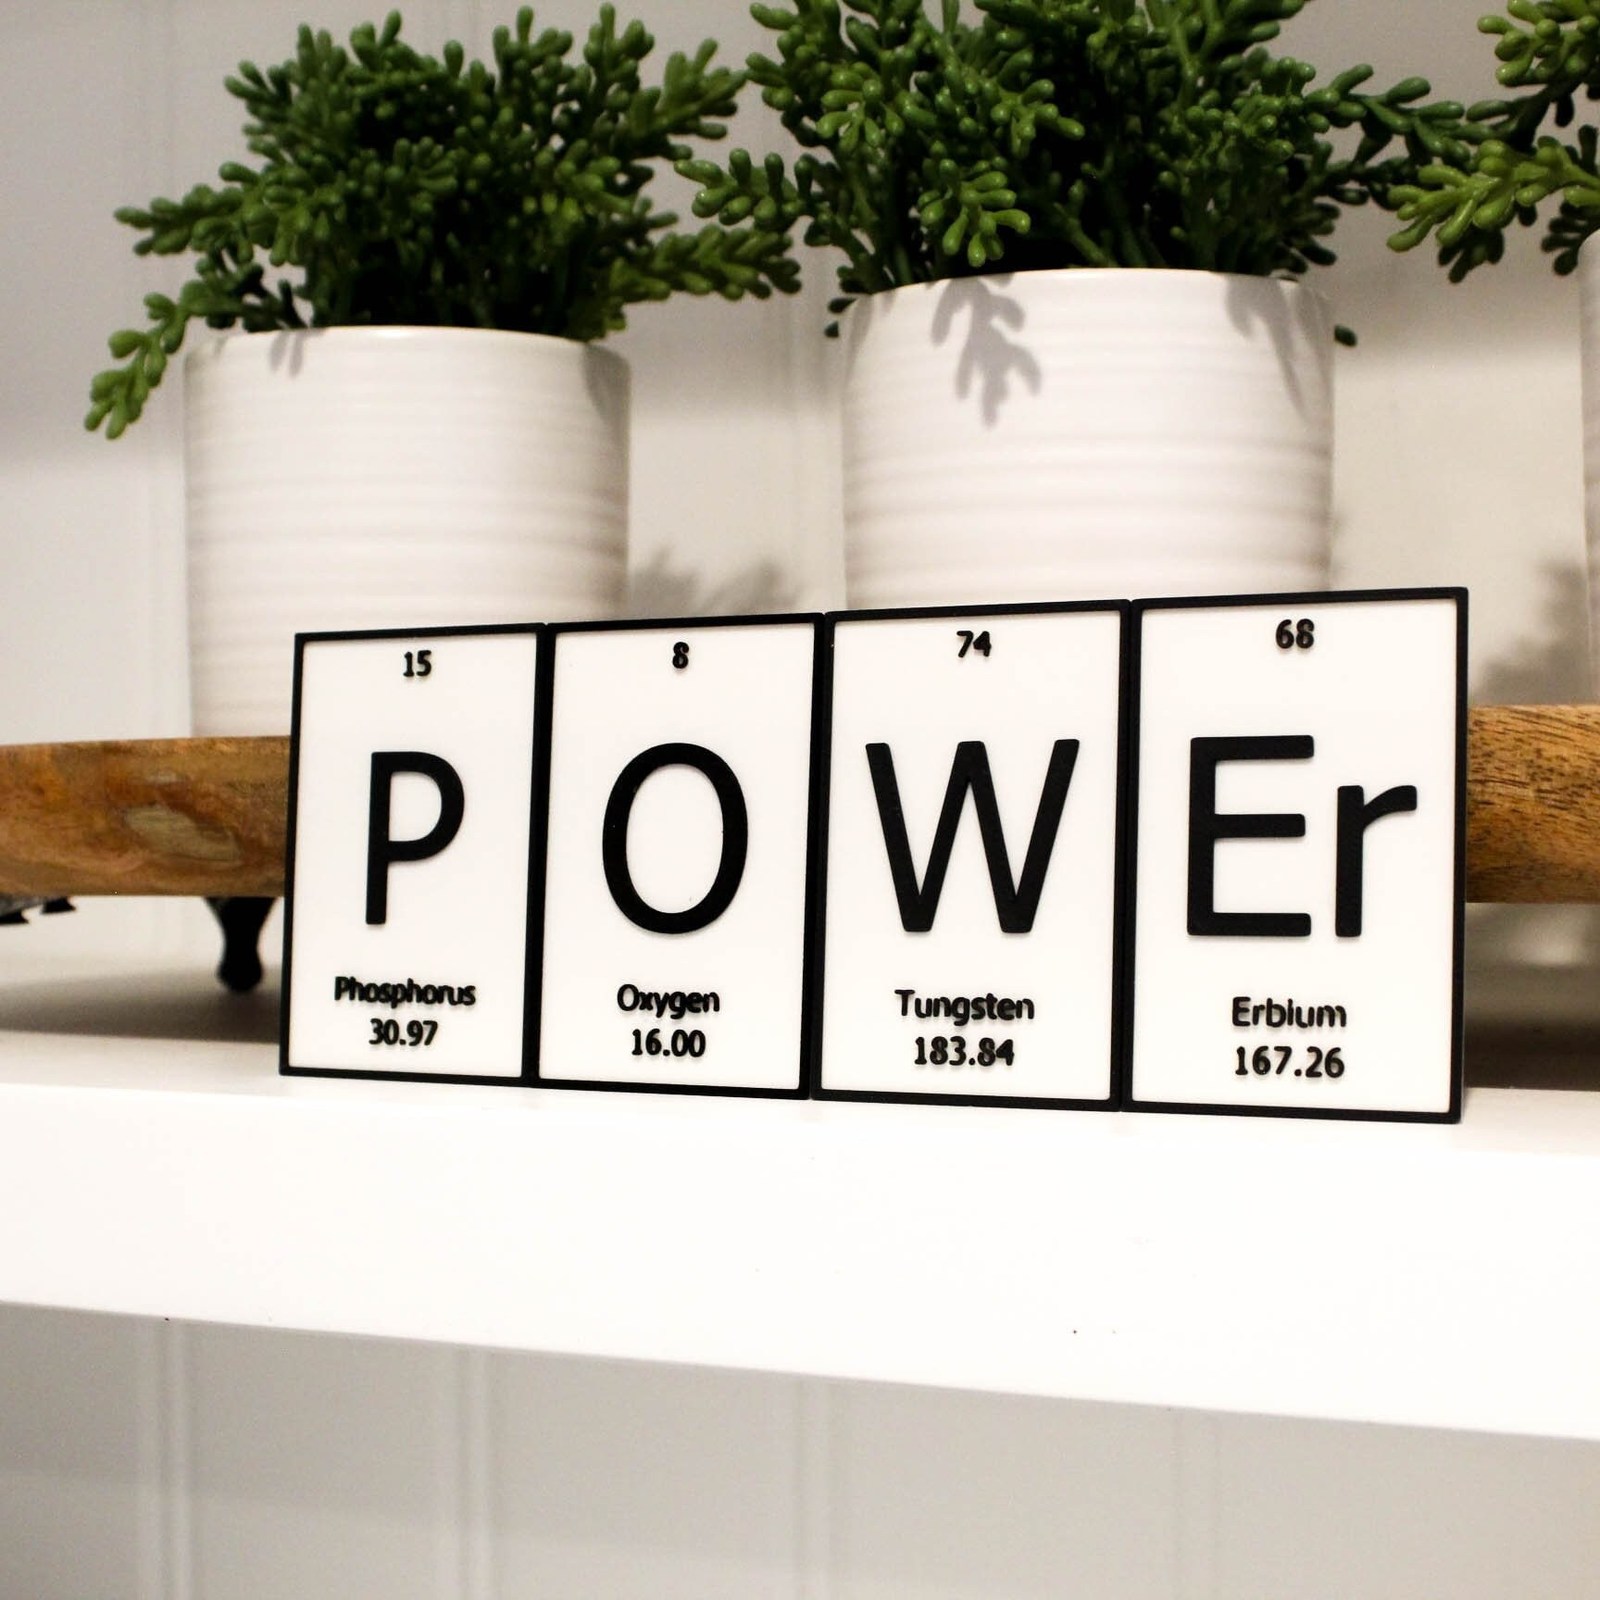 Primary image for PoWEr | Periodic Table of Elements Wall, Desk or Shelf Sign